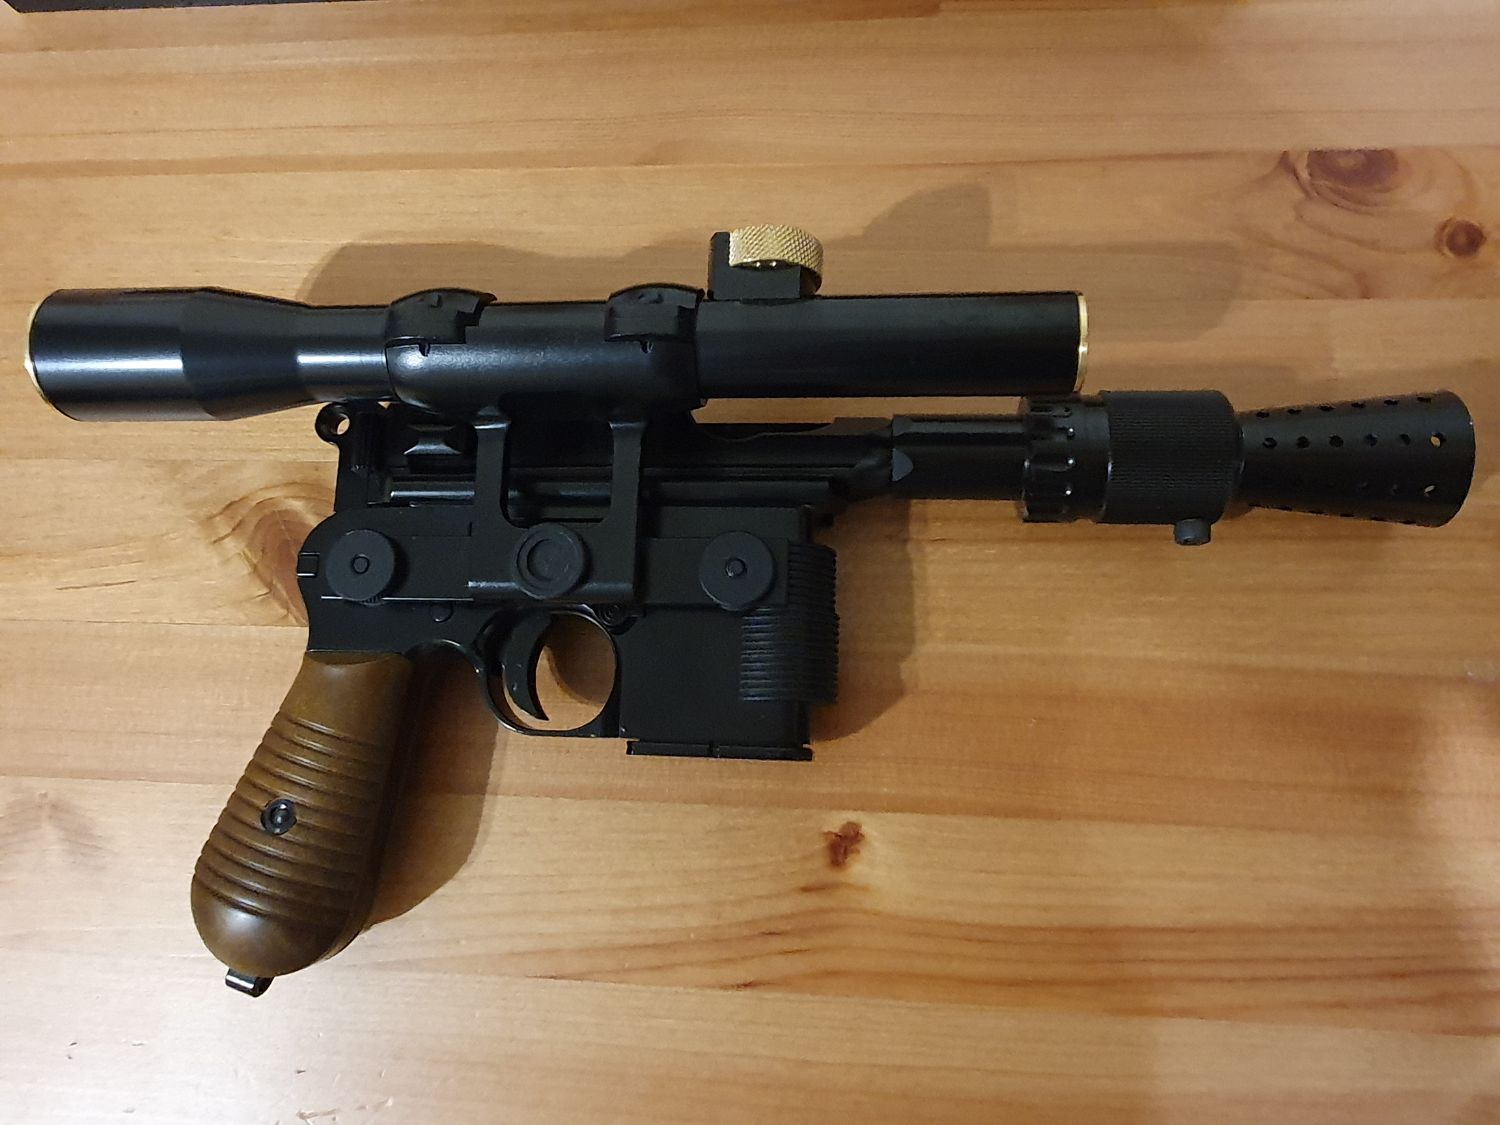 Armourer Works DL-44 (Han Solo) - Gas Pistols - Airsoft Forums UK